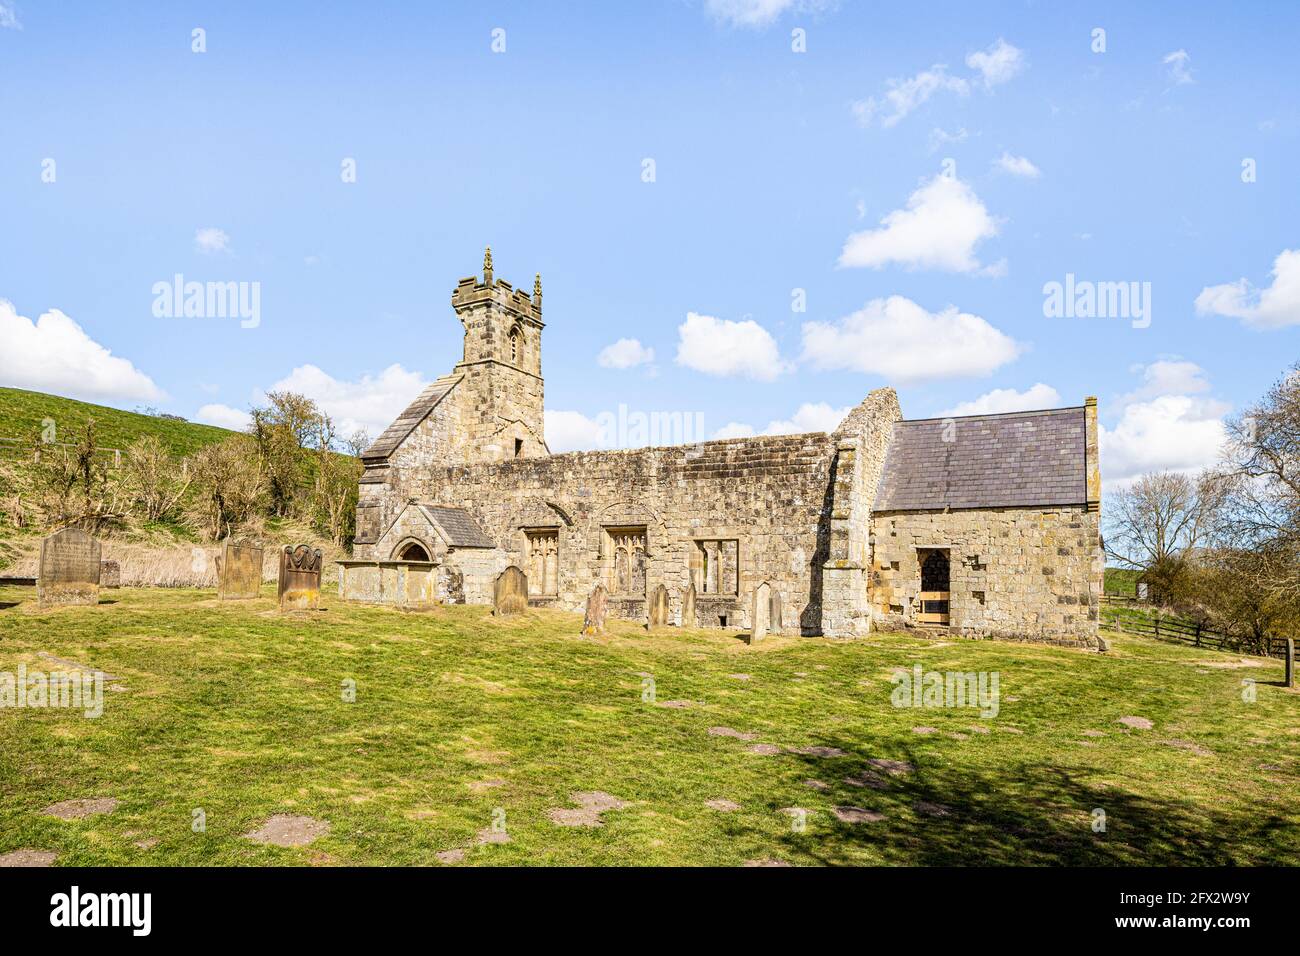 The ruins of St Martins church at Wharram Percy Deserted Medieval Village on the Yorkshire Wolds, North Yorkshire, England UK Stock Photo